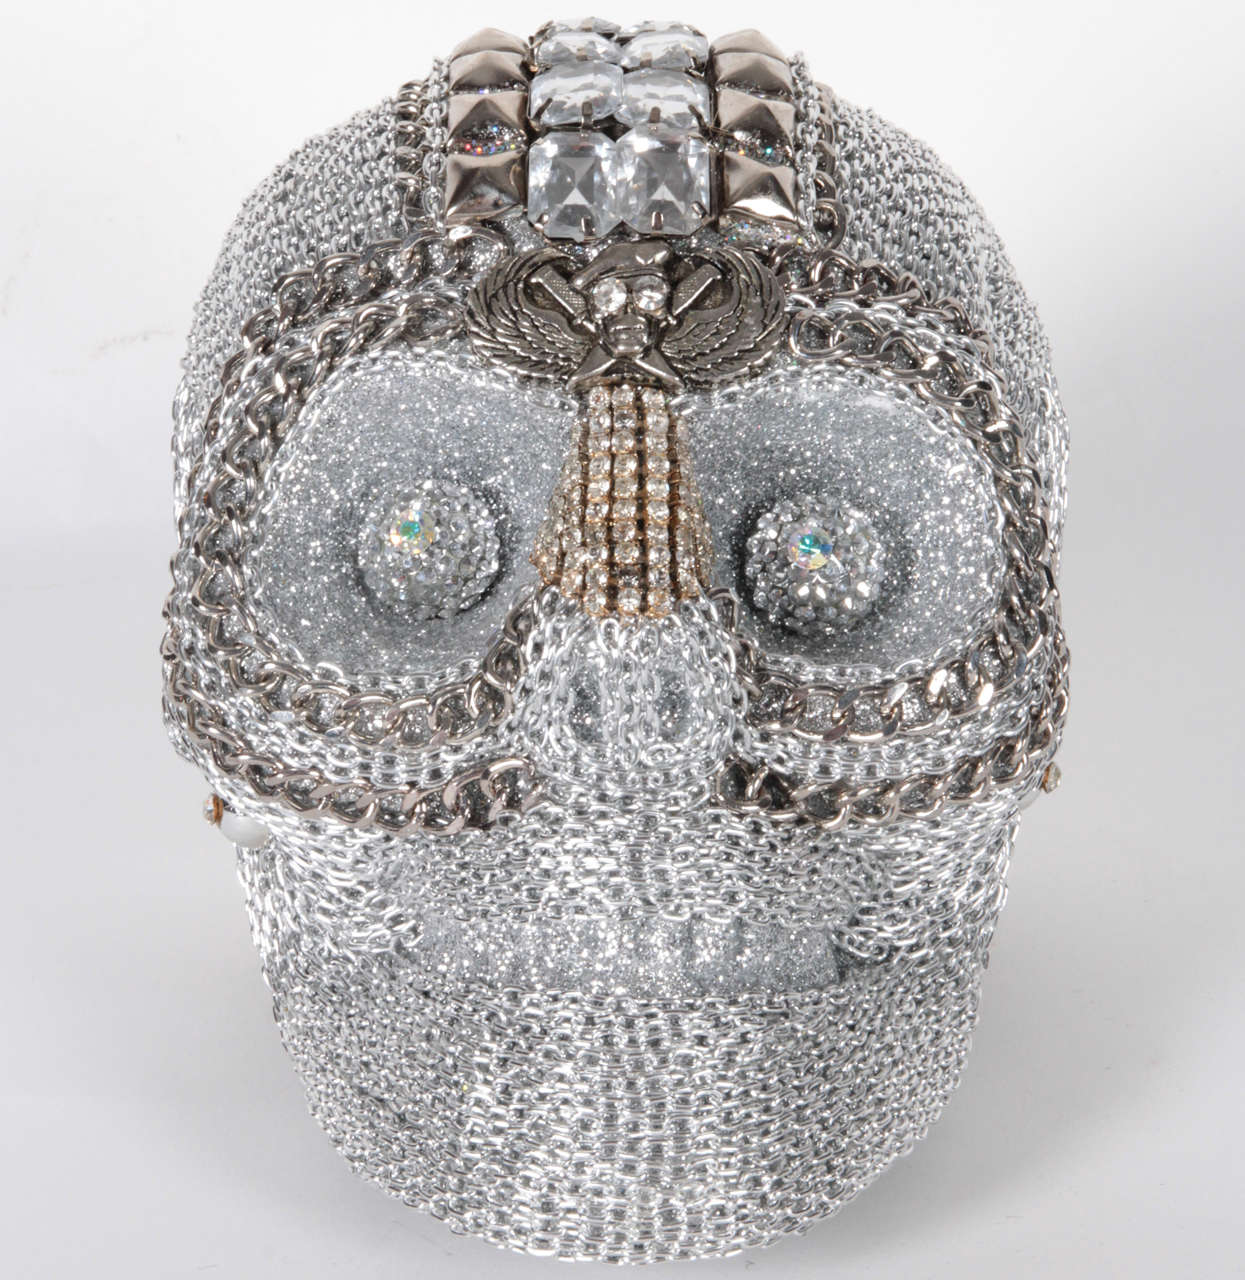 Fantastic and decorative  decorative skull encrusted with chain and vintage rhinestone jewelry findings by W Beaupre.